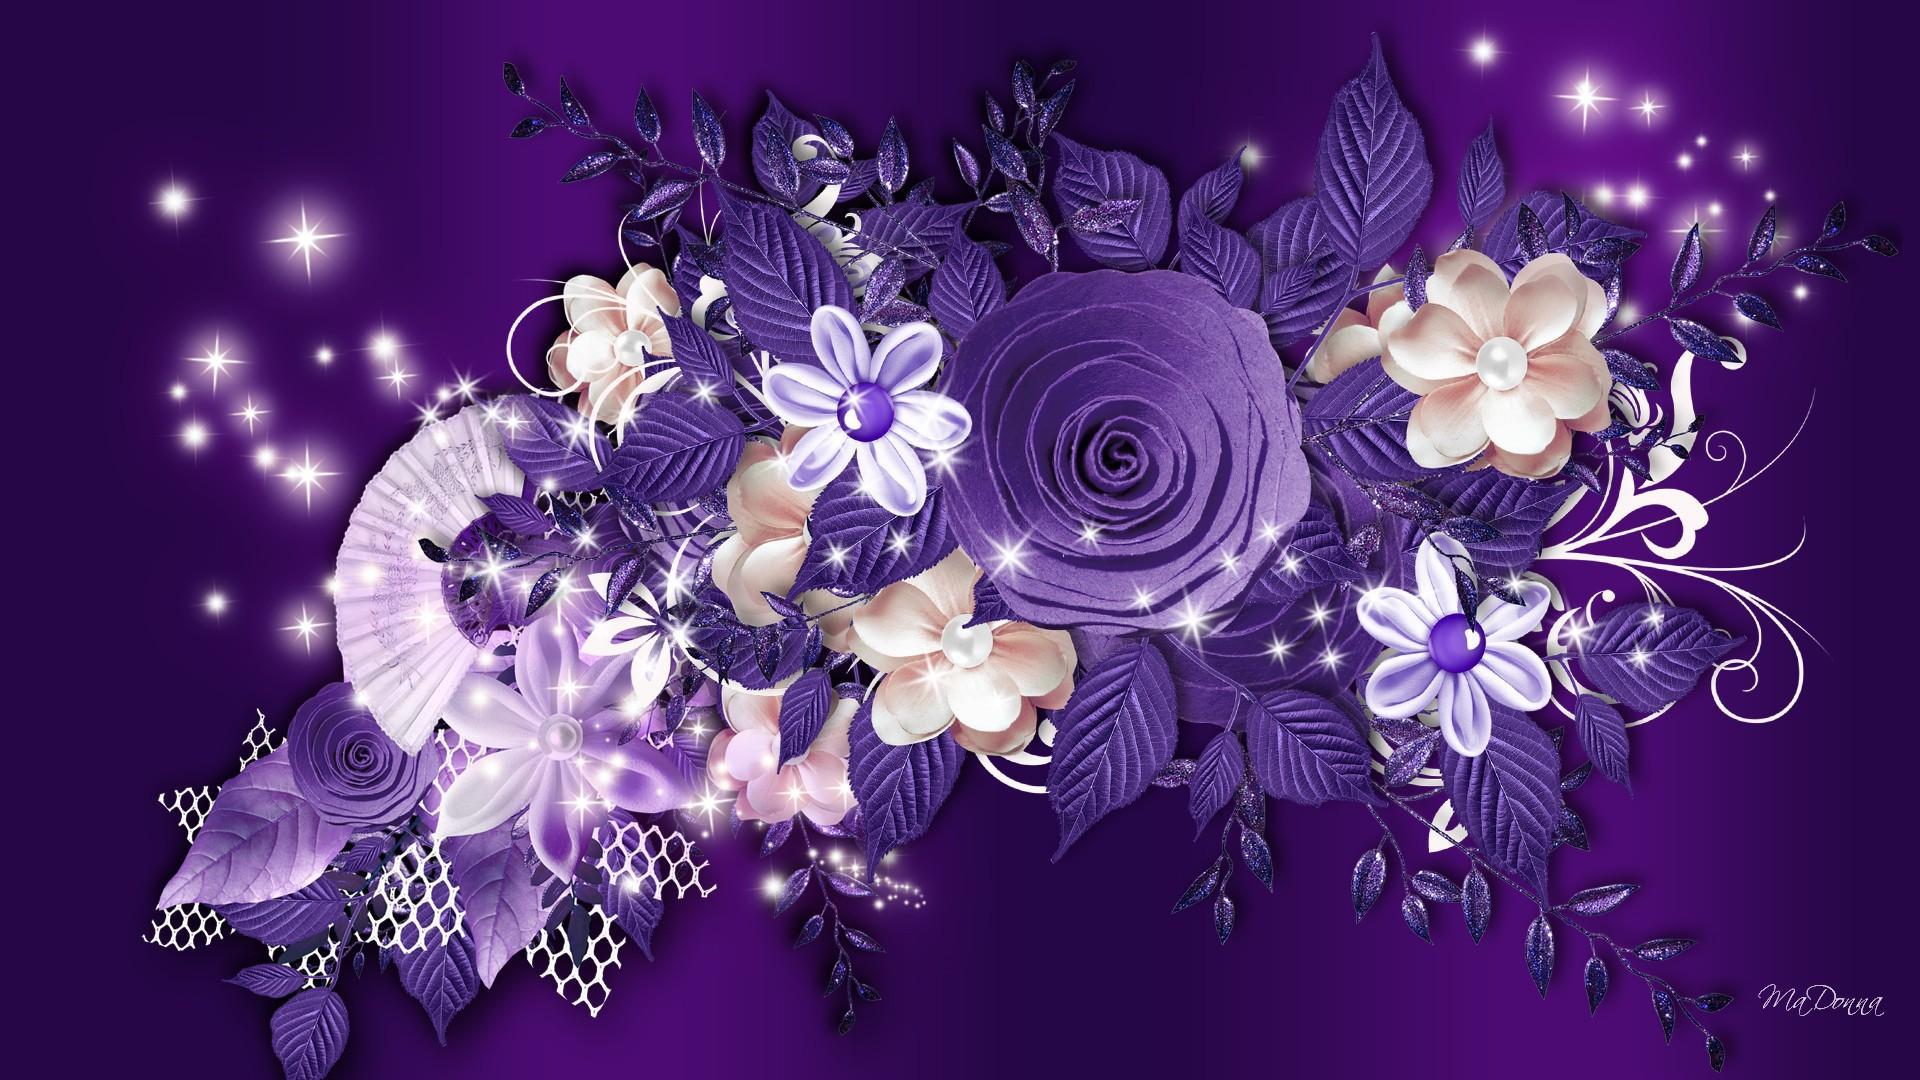 Purple roses and other flowers on a purple background wallpapers and